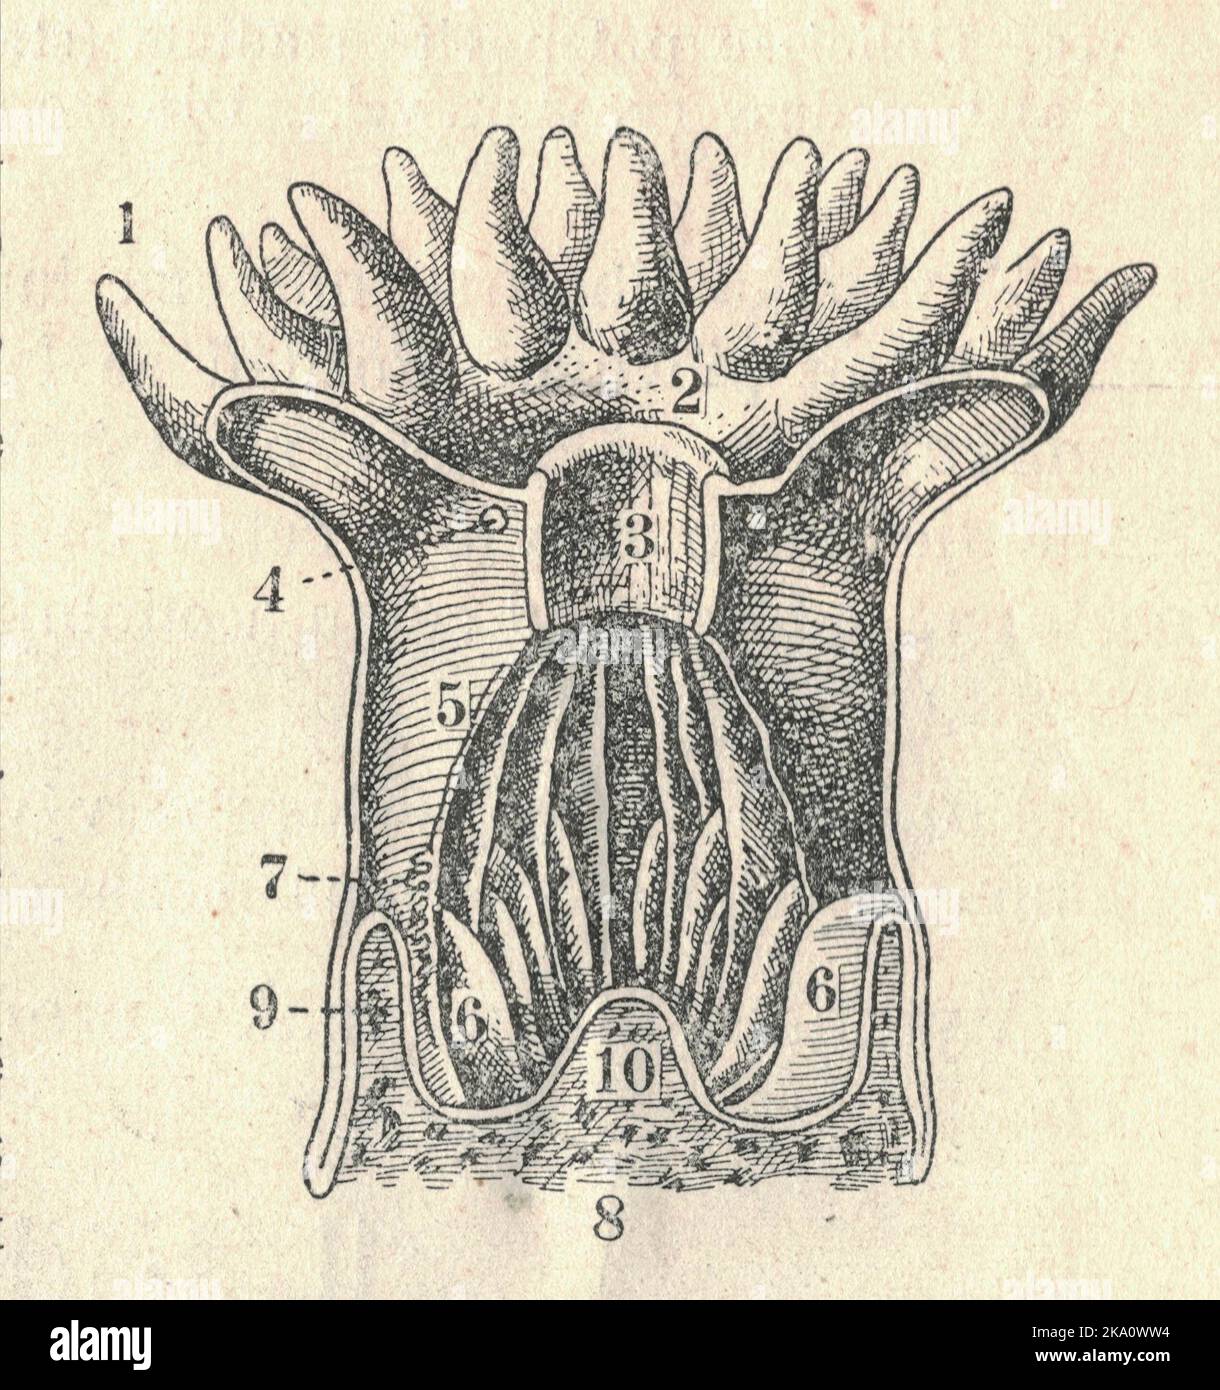 Anatomy of a coral polyp. Old engraved picture of the coral polyp. Book illustration published 1907. A polyp in zoology is one of two forms found in the phylum Cnidaria, the other being the medusa. Polyps are roughly cylindrical in shape and elongated at the axis of the vase-shaped body. In solitary polyps, the aboral (opposite to oral) end is attached to the substrate by means of a disc-like holdfast called a pedal disc, while in colonies of polyps it is connected to other polyps, either directly or indirectly. The oral end contains the mouth, and is surrounded by a circlet of tentacles. Stock Photo